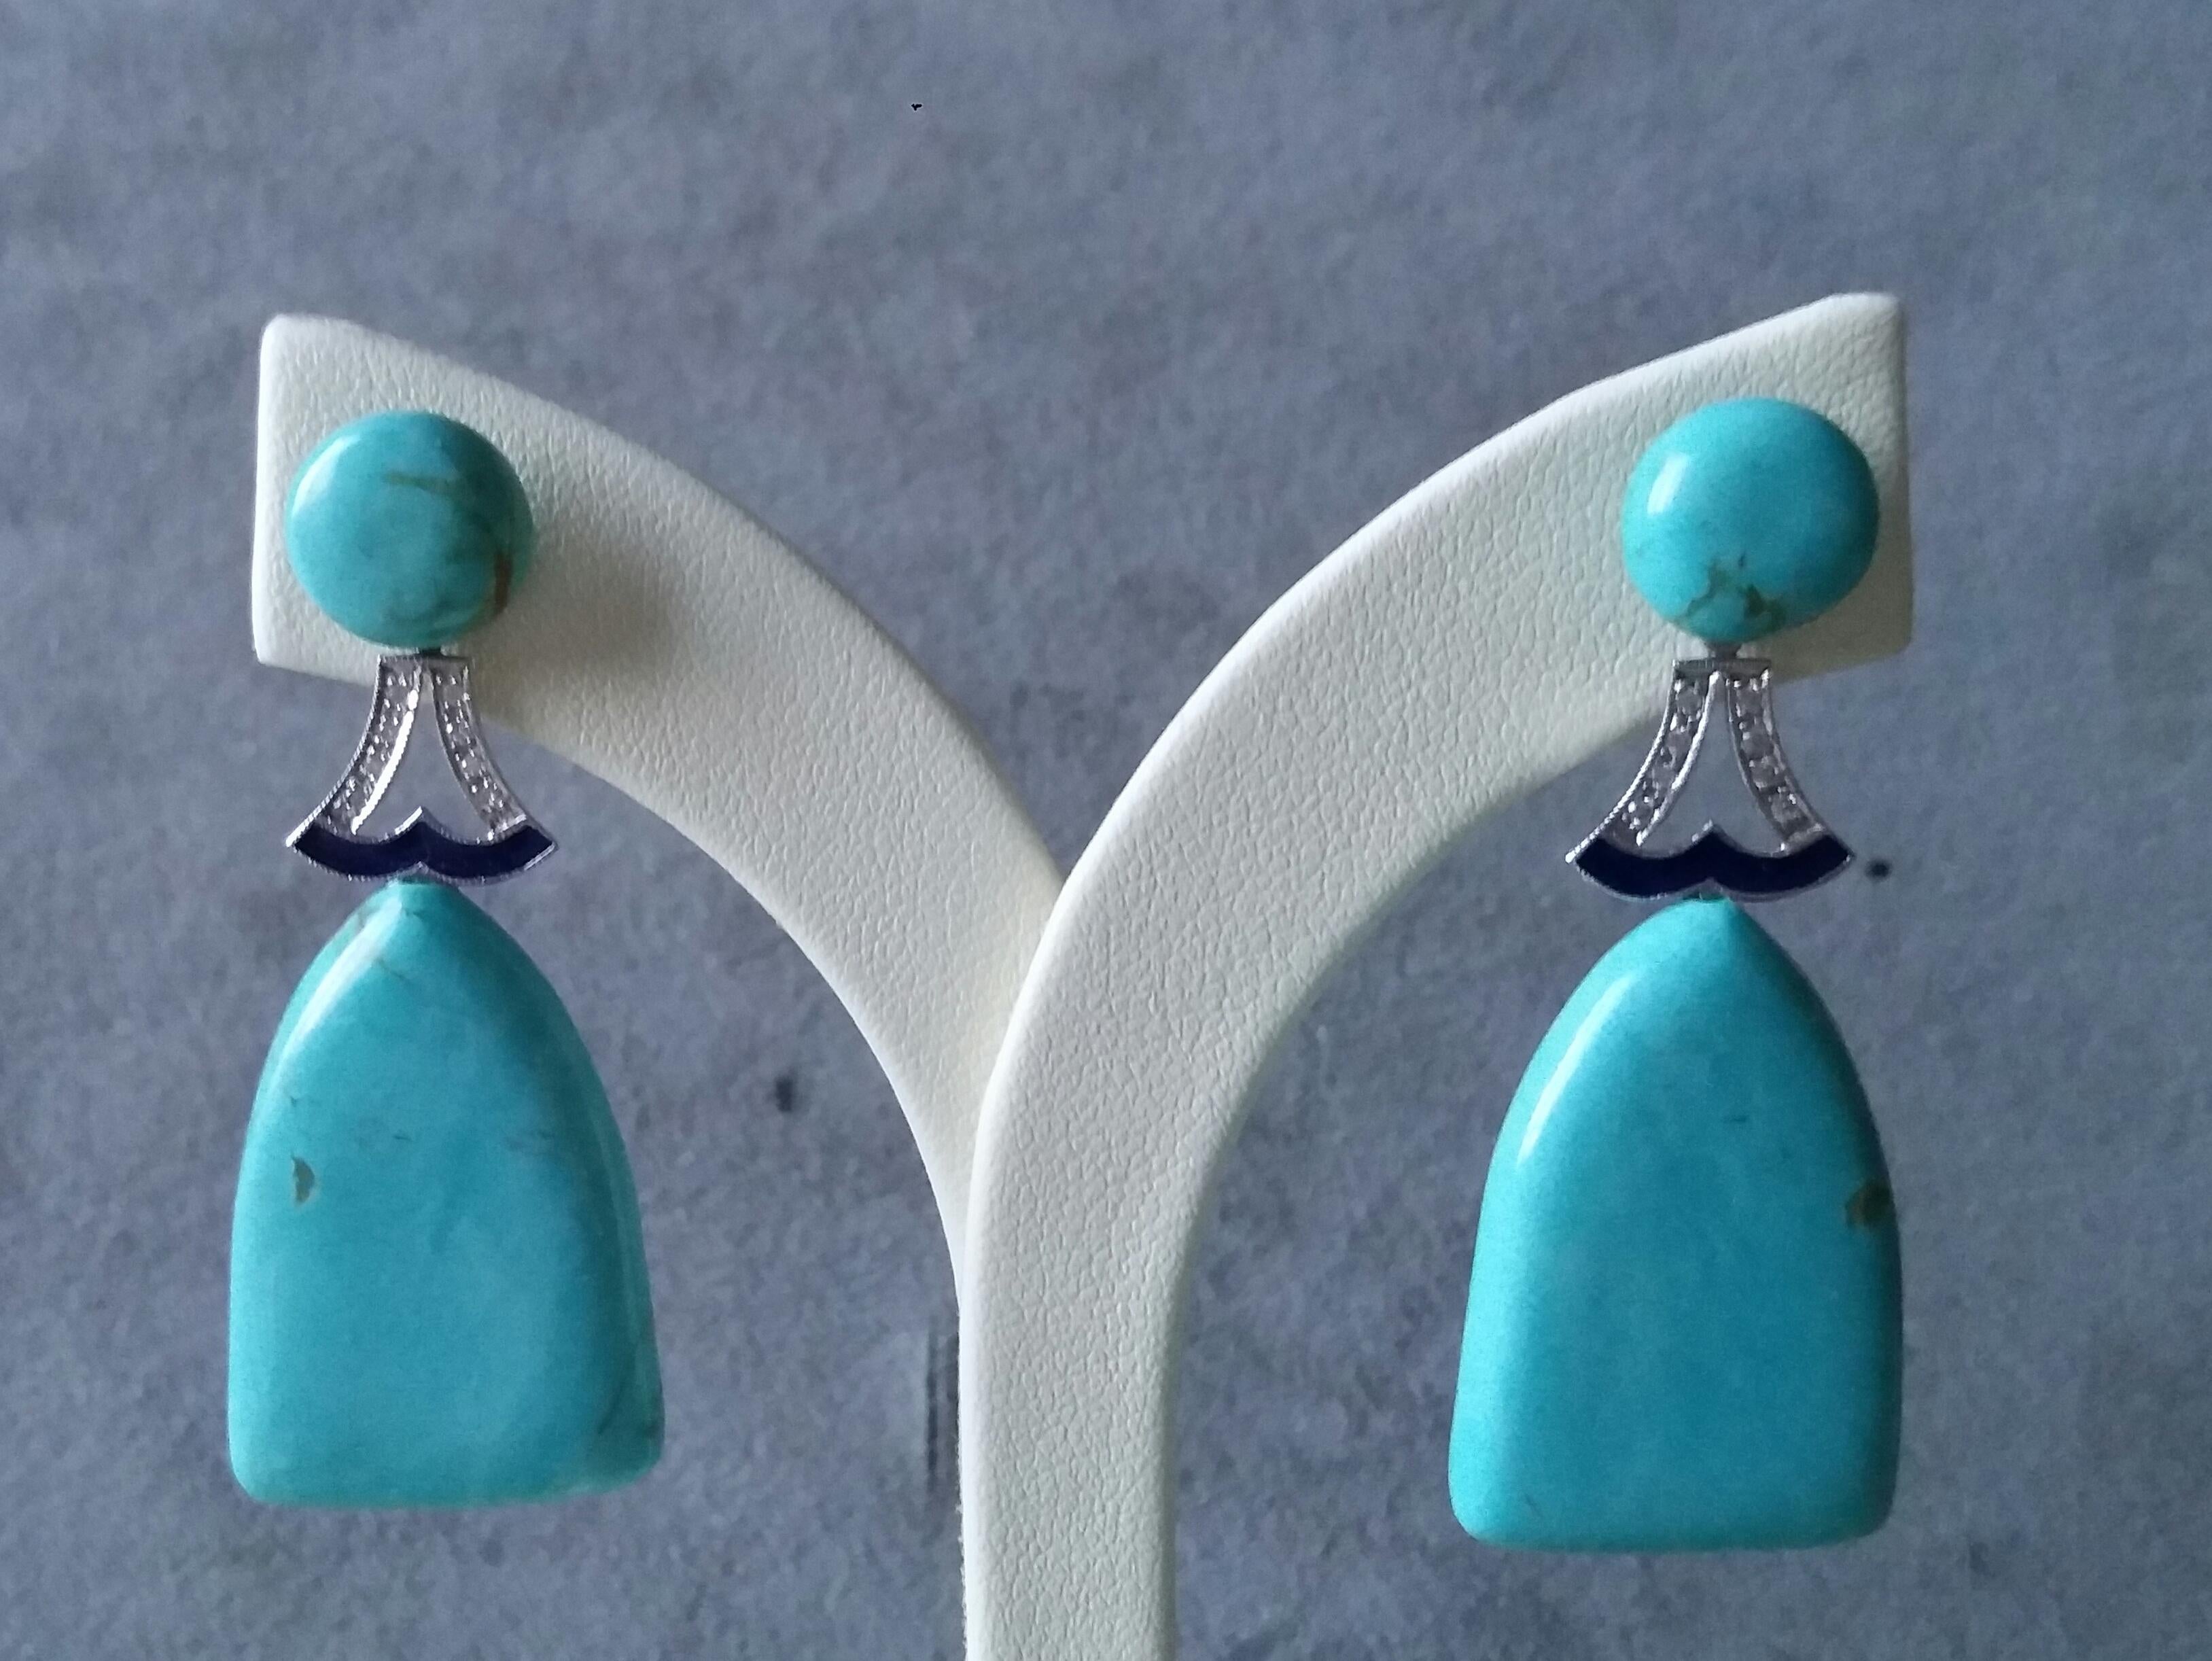 2 round genuine Turquoise as tops,middle parts in white gold,diamonds and blue enamel,bottom parts are 2 genuine Turquoise sail shape  flat drops
Length 50 mm
Width 20 mm
Weight 12 grams
In 1978 our workshop started in Italy to make simple-chic Art